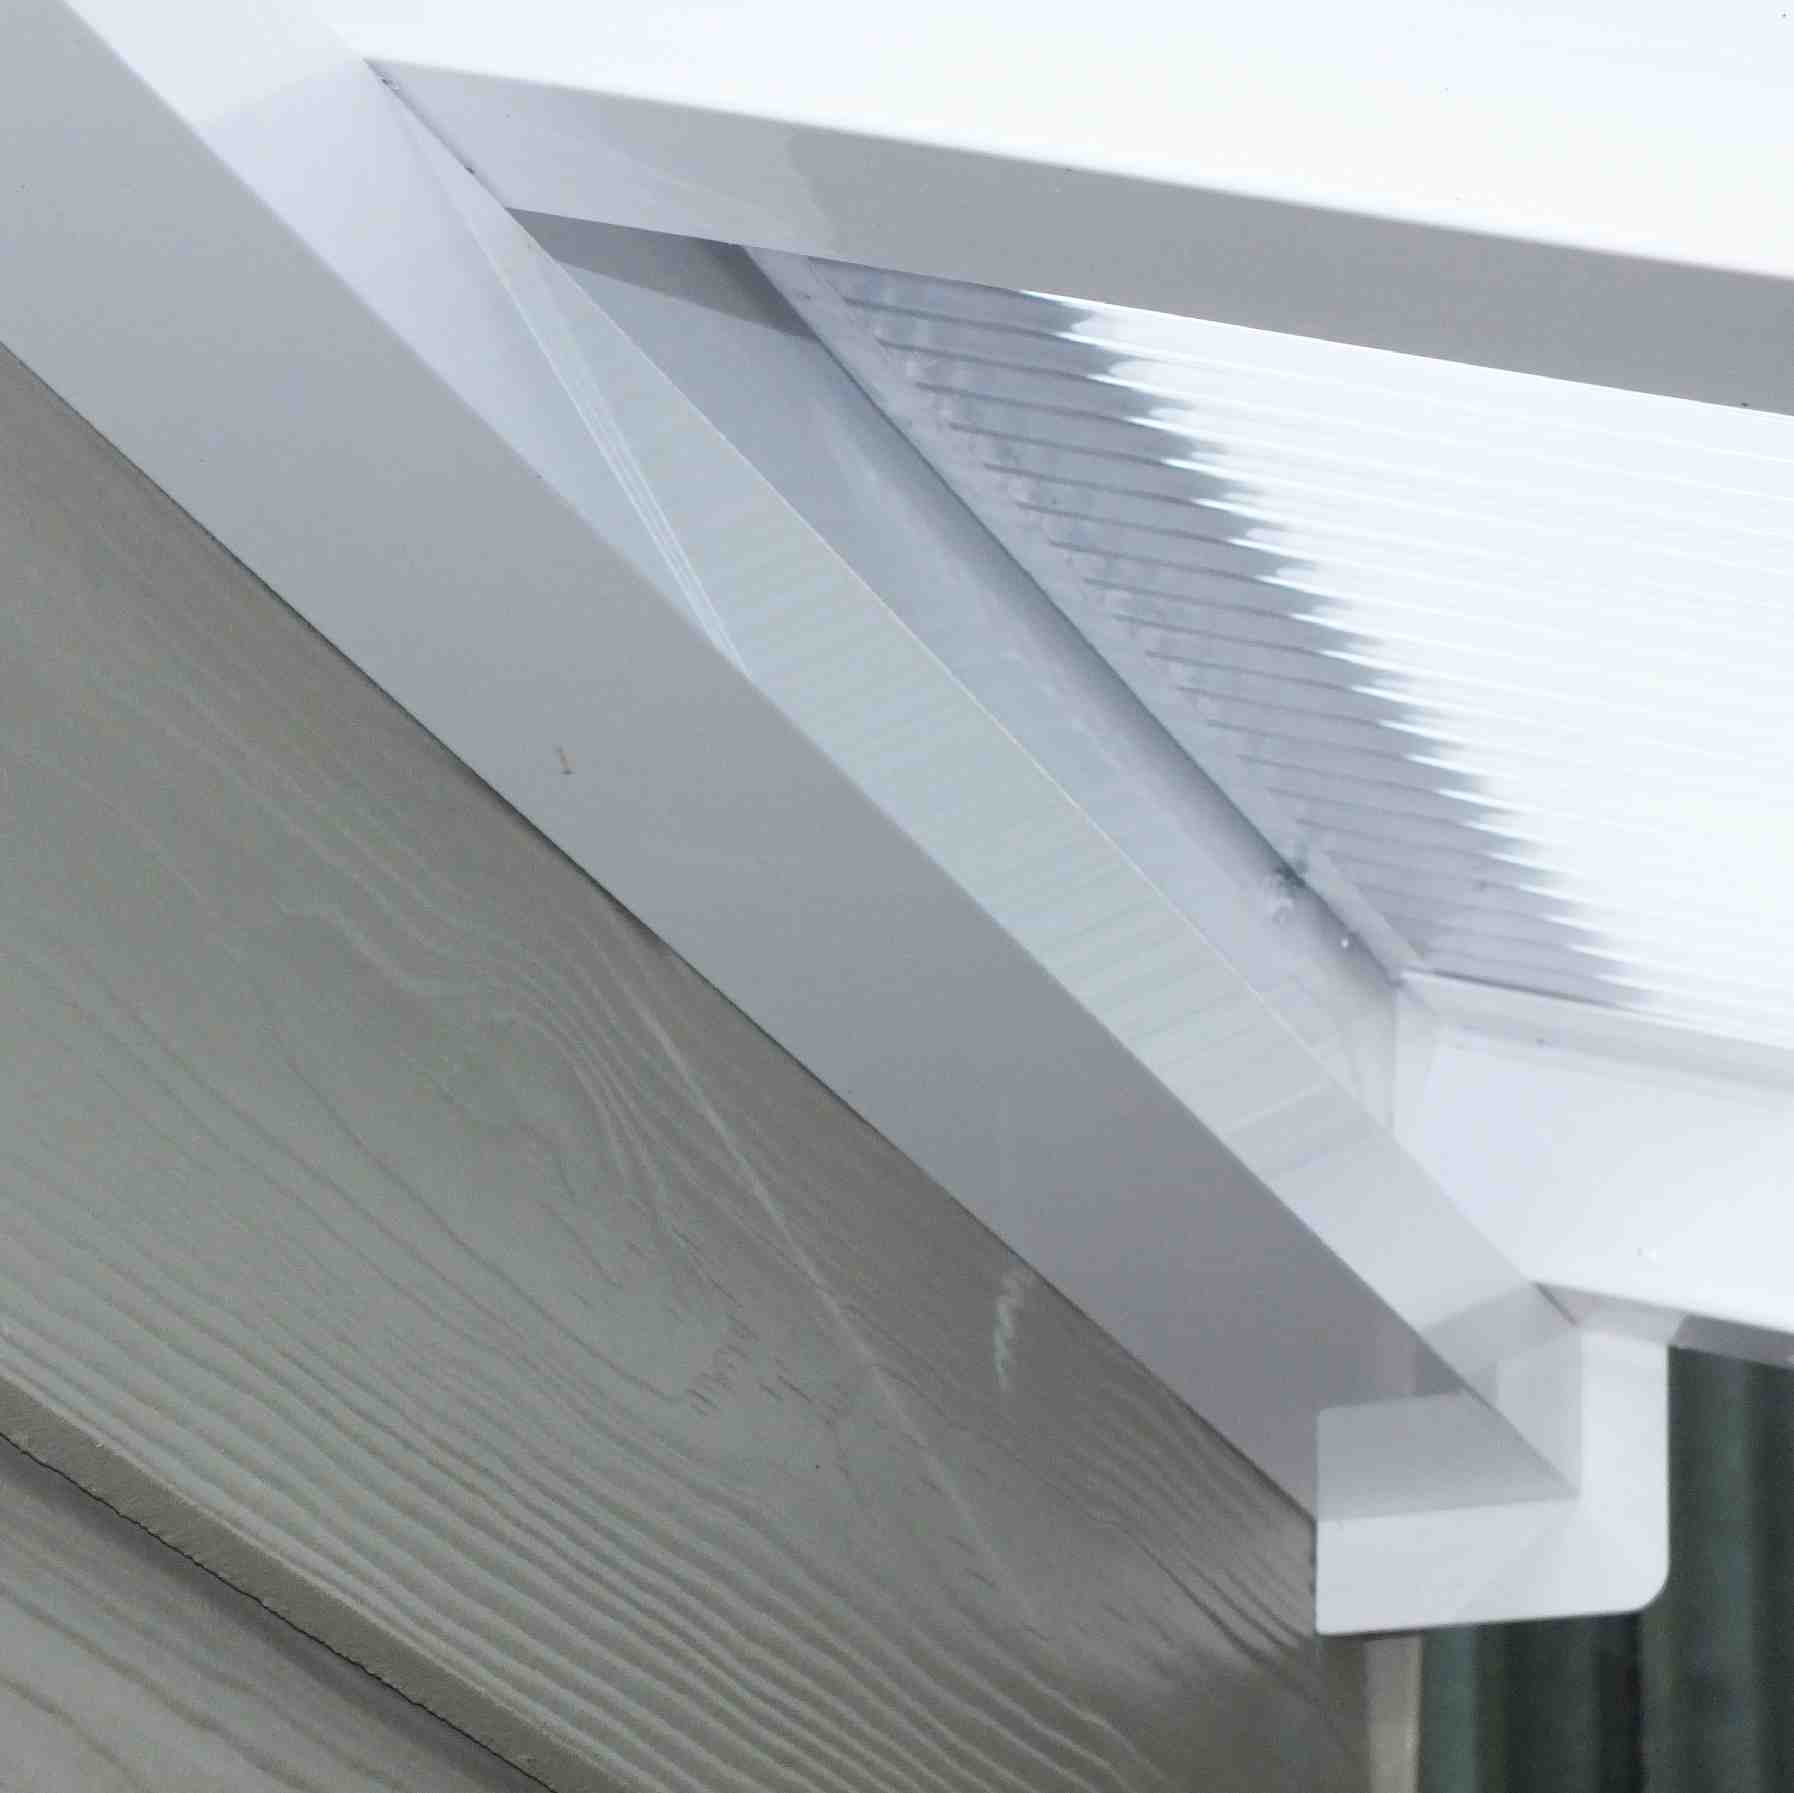 Great deals on Omega Verandah White with 16mm Polycarbonate Glazing - 8.4m (W) x 2.0m (P), (4) Supporting Posts